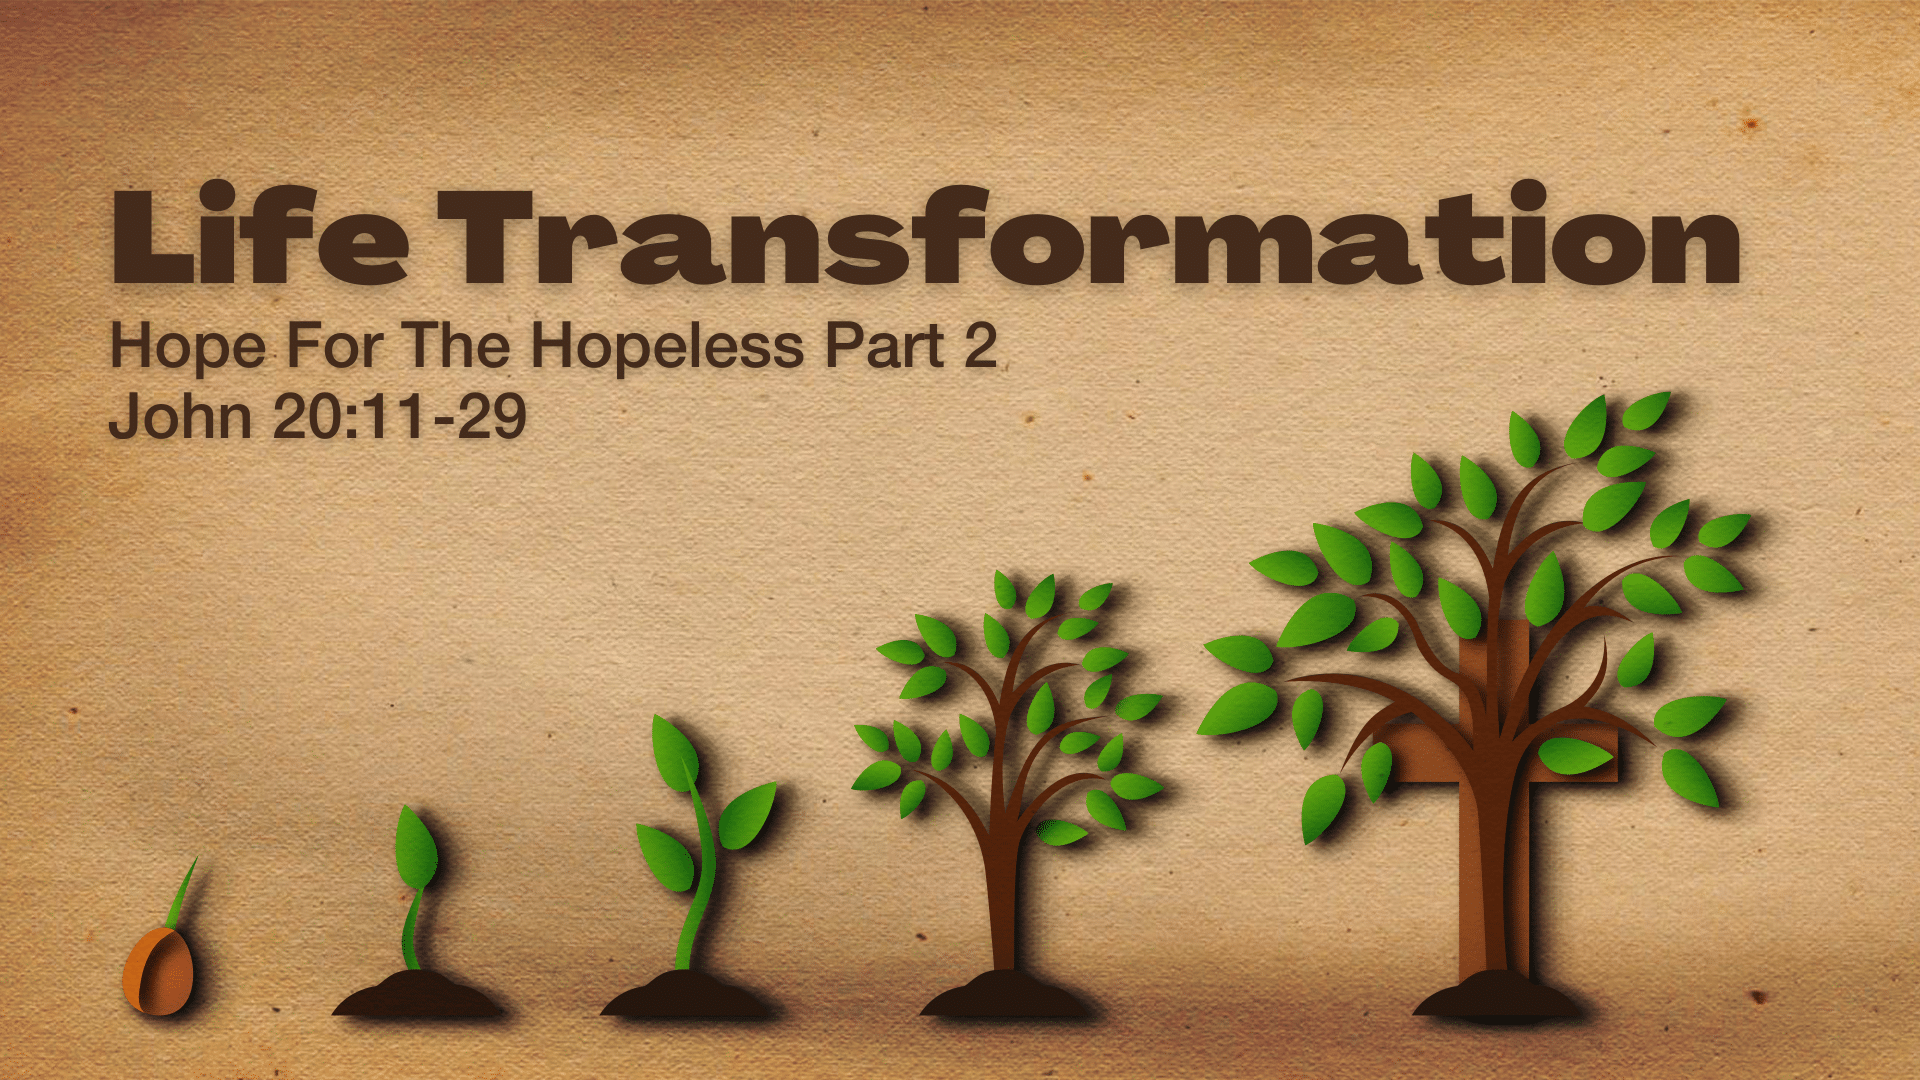 Life Transformation: Hope For The Hopeless, Part 2